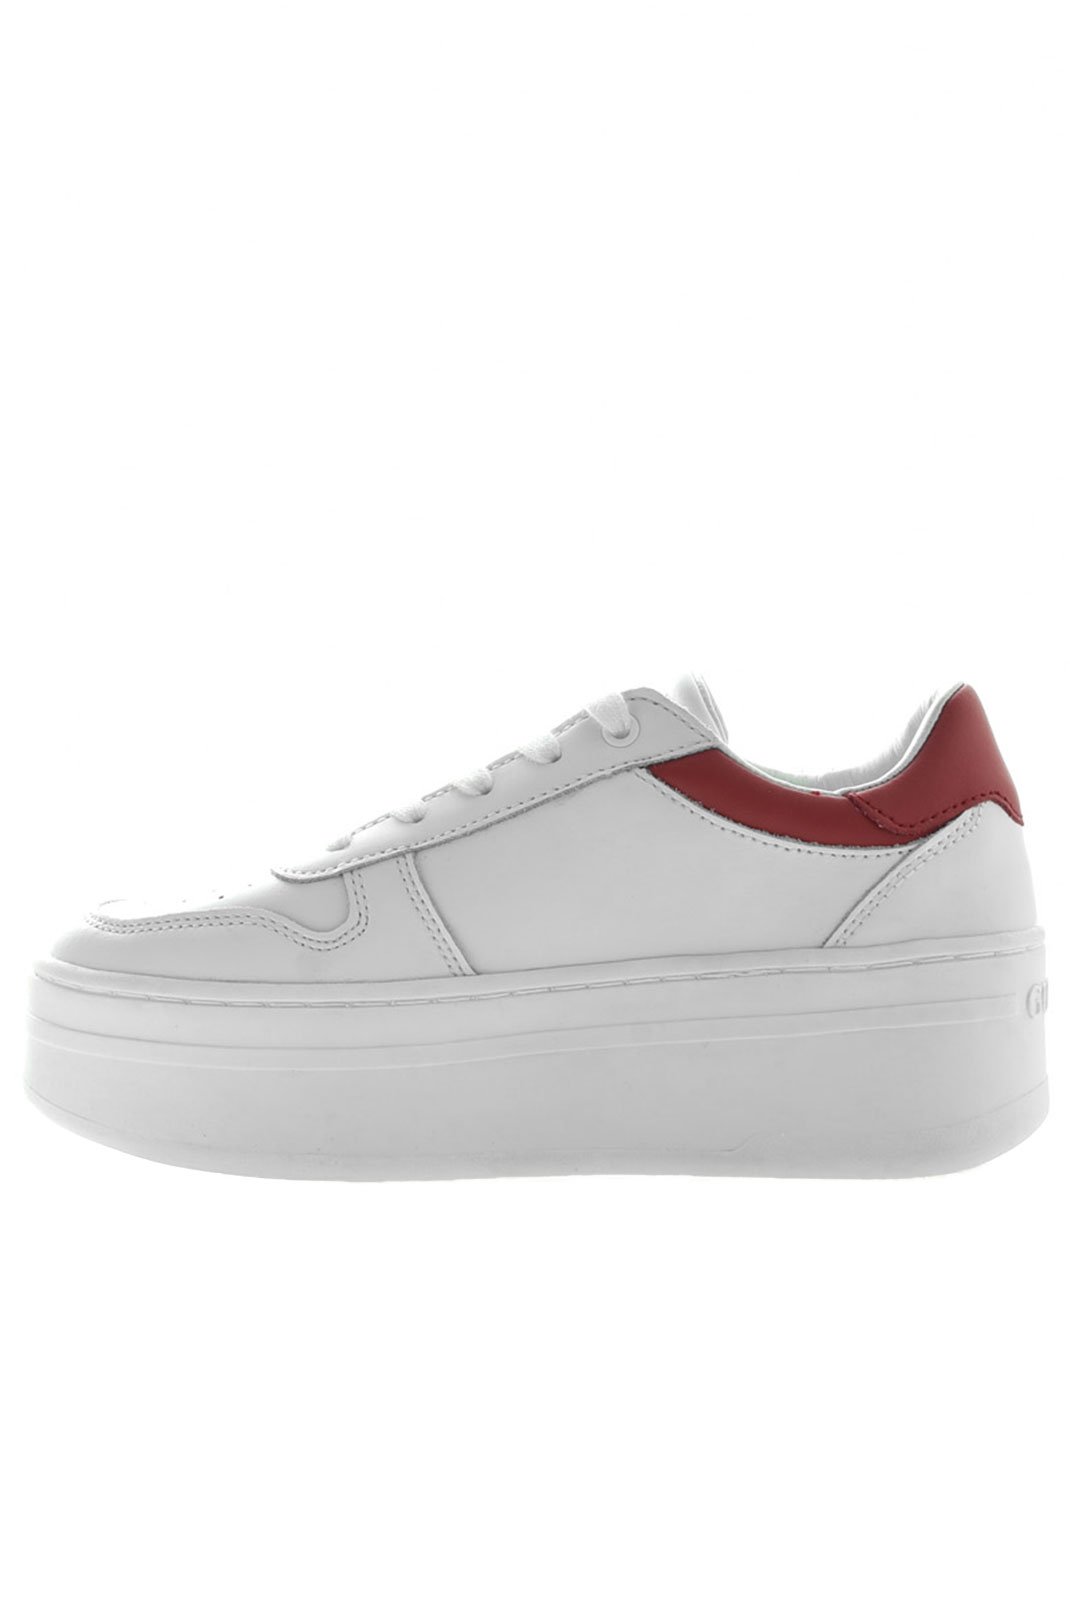 Chaussures  Guess jeans FL6LIF LEA12 WHITE RED